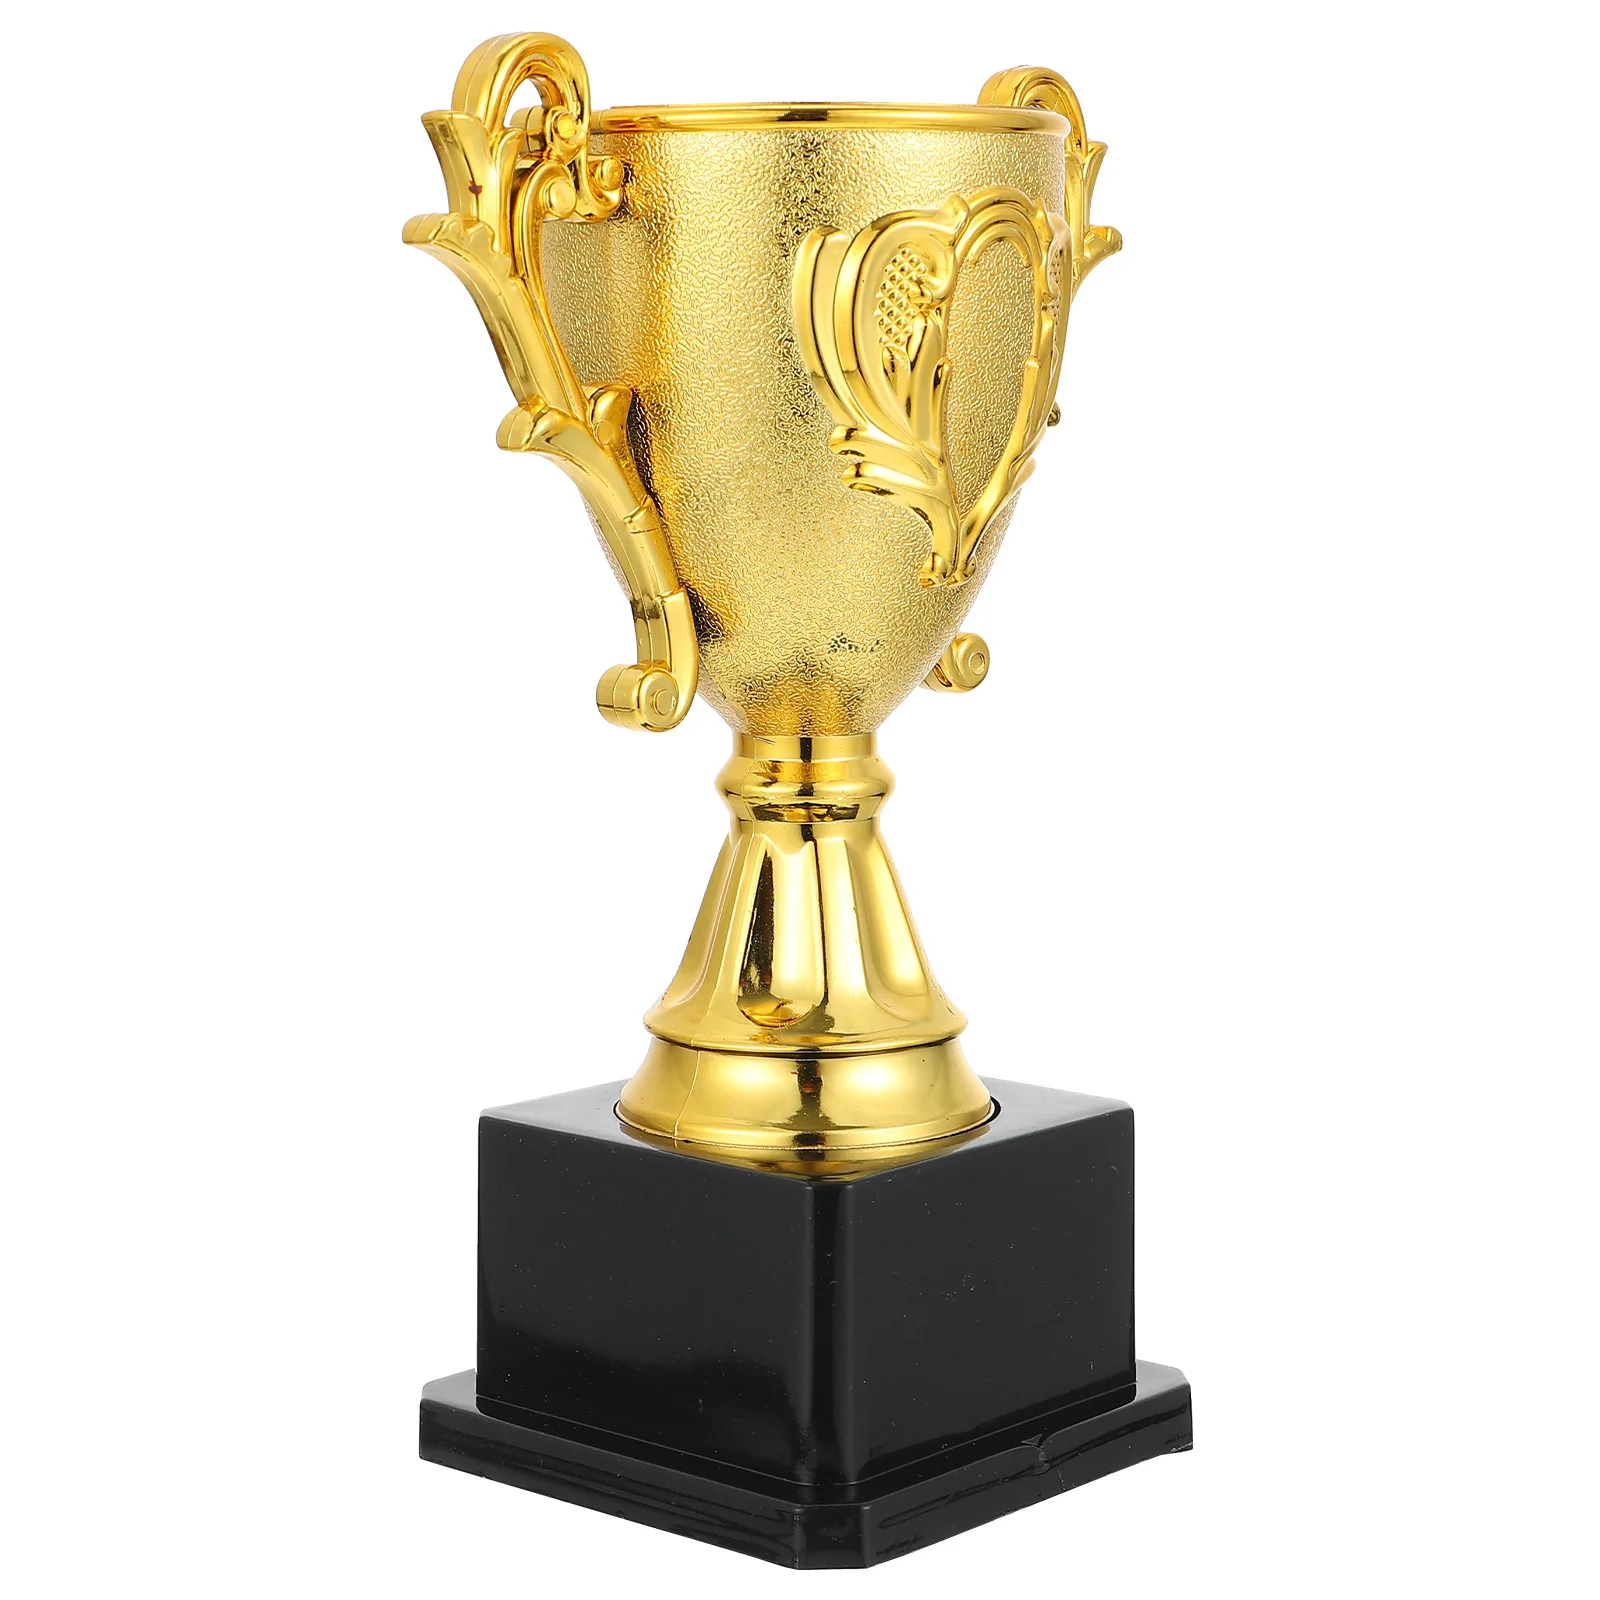 

Trophies Trophy Educational Competitions Trophy Award Cups for Party Favors Kindergarten Primary School ( 18cm ) Soccer